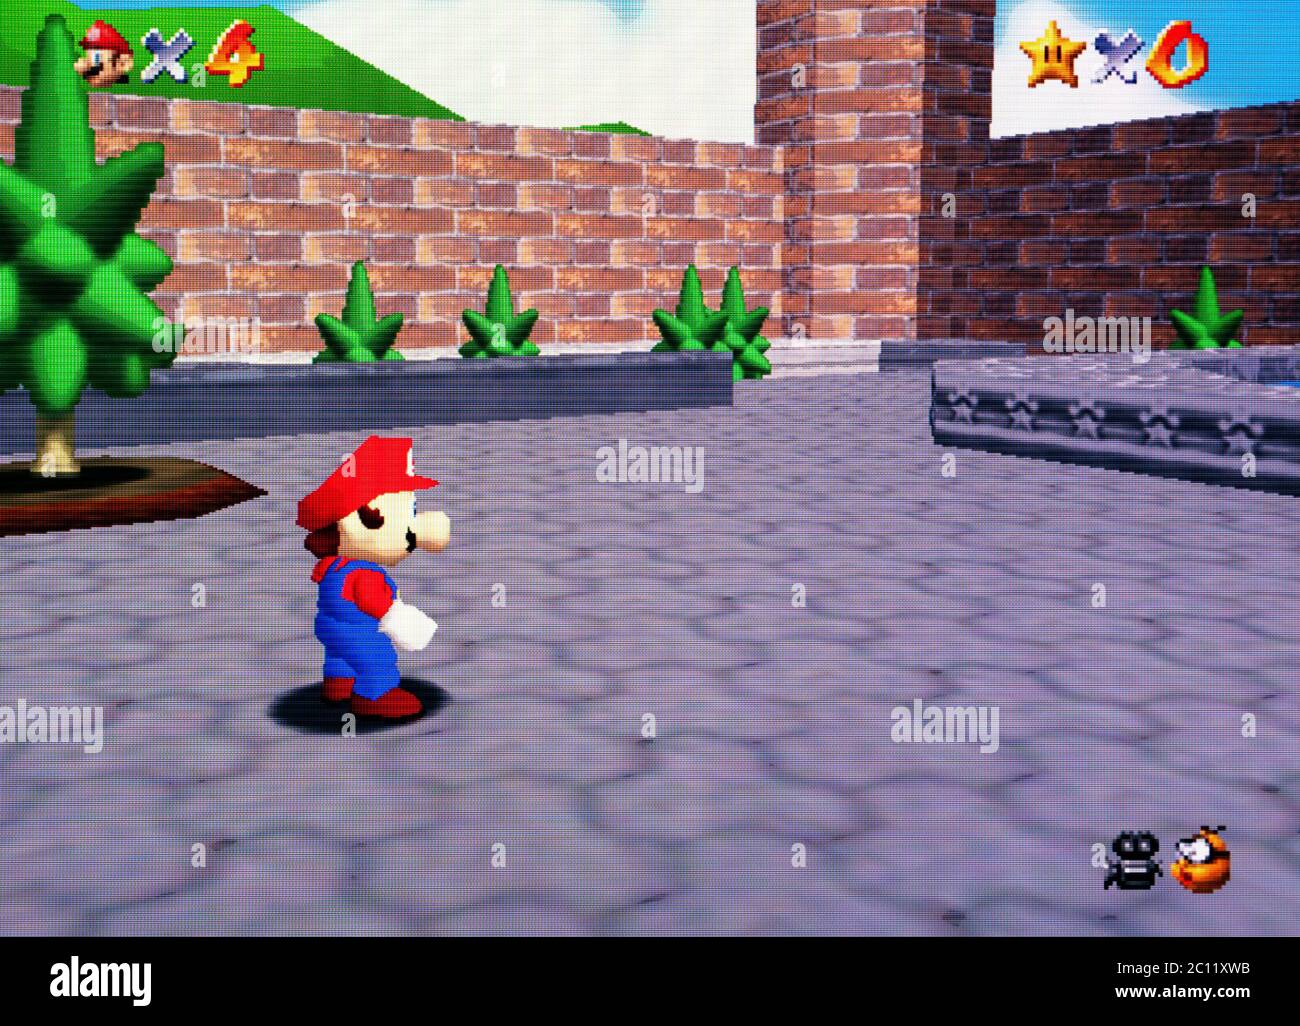 Super Mario 64 High Resolution Stock Photography And Images Alamy